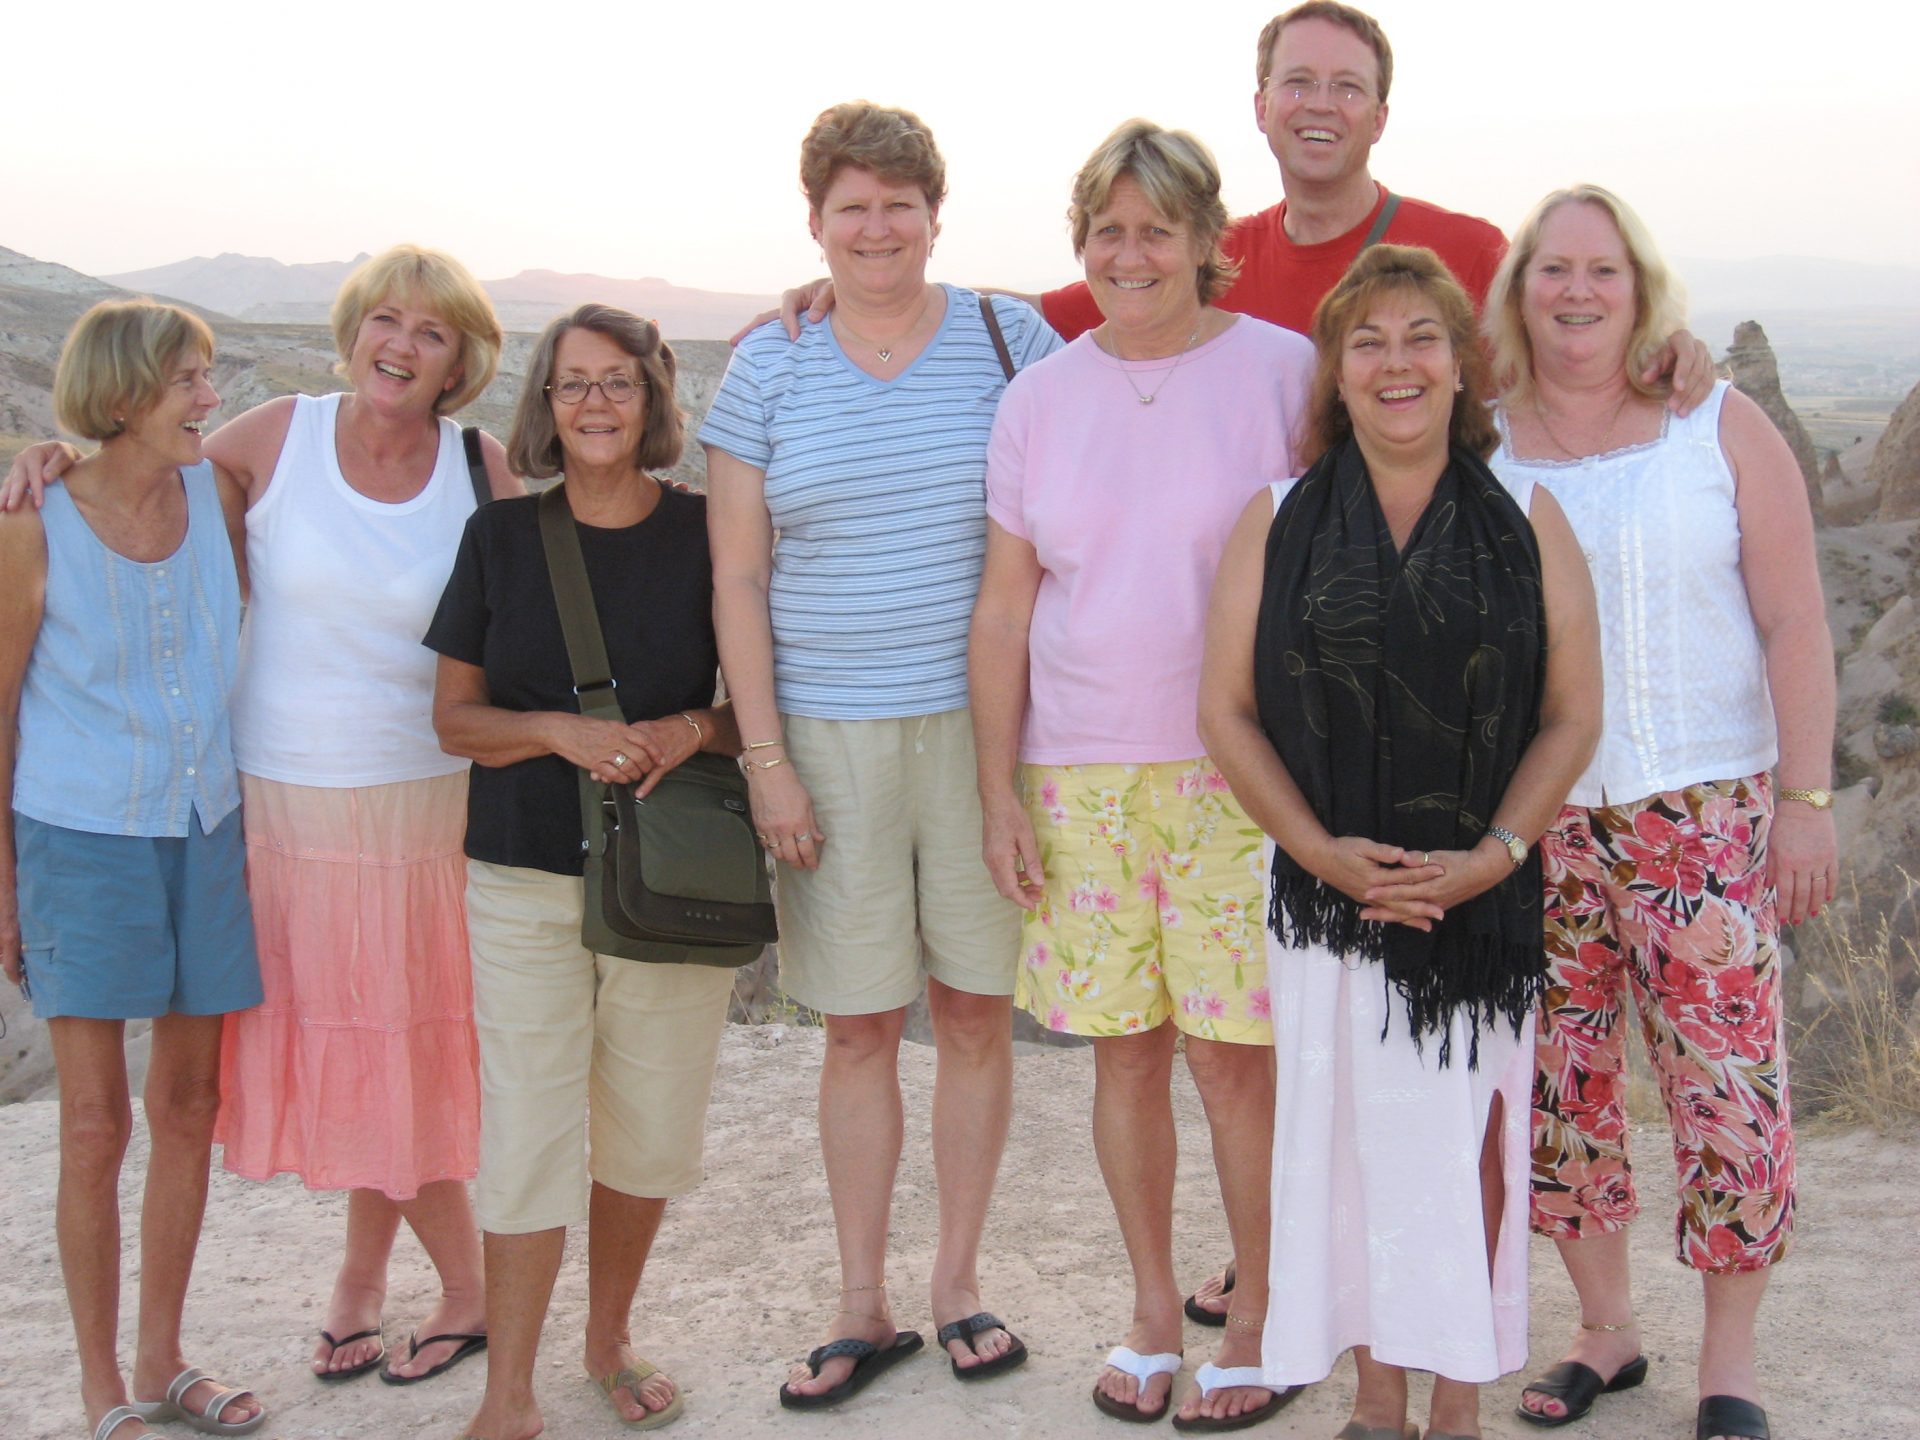 The Cruzian Crew in Turkey with Jane ignoring the camera and enjoying the sight of her dear friends Babe, Merritt, Nancy, Barb, Darrell, Liz and Kim.  Our hearts have broken.